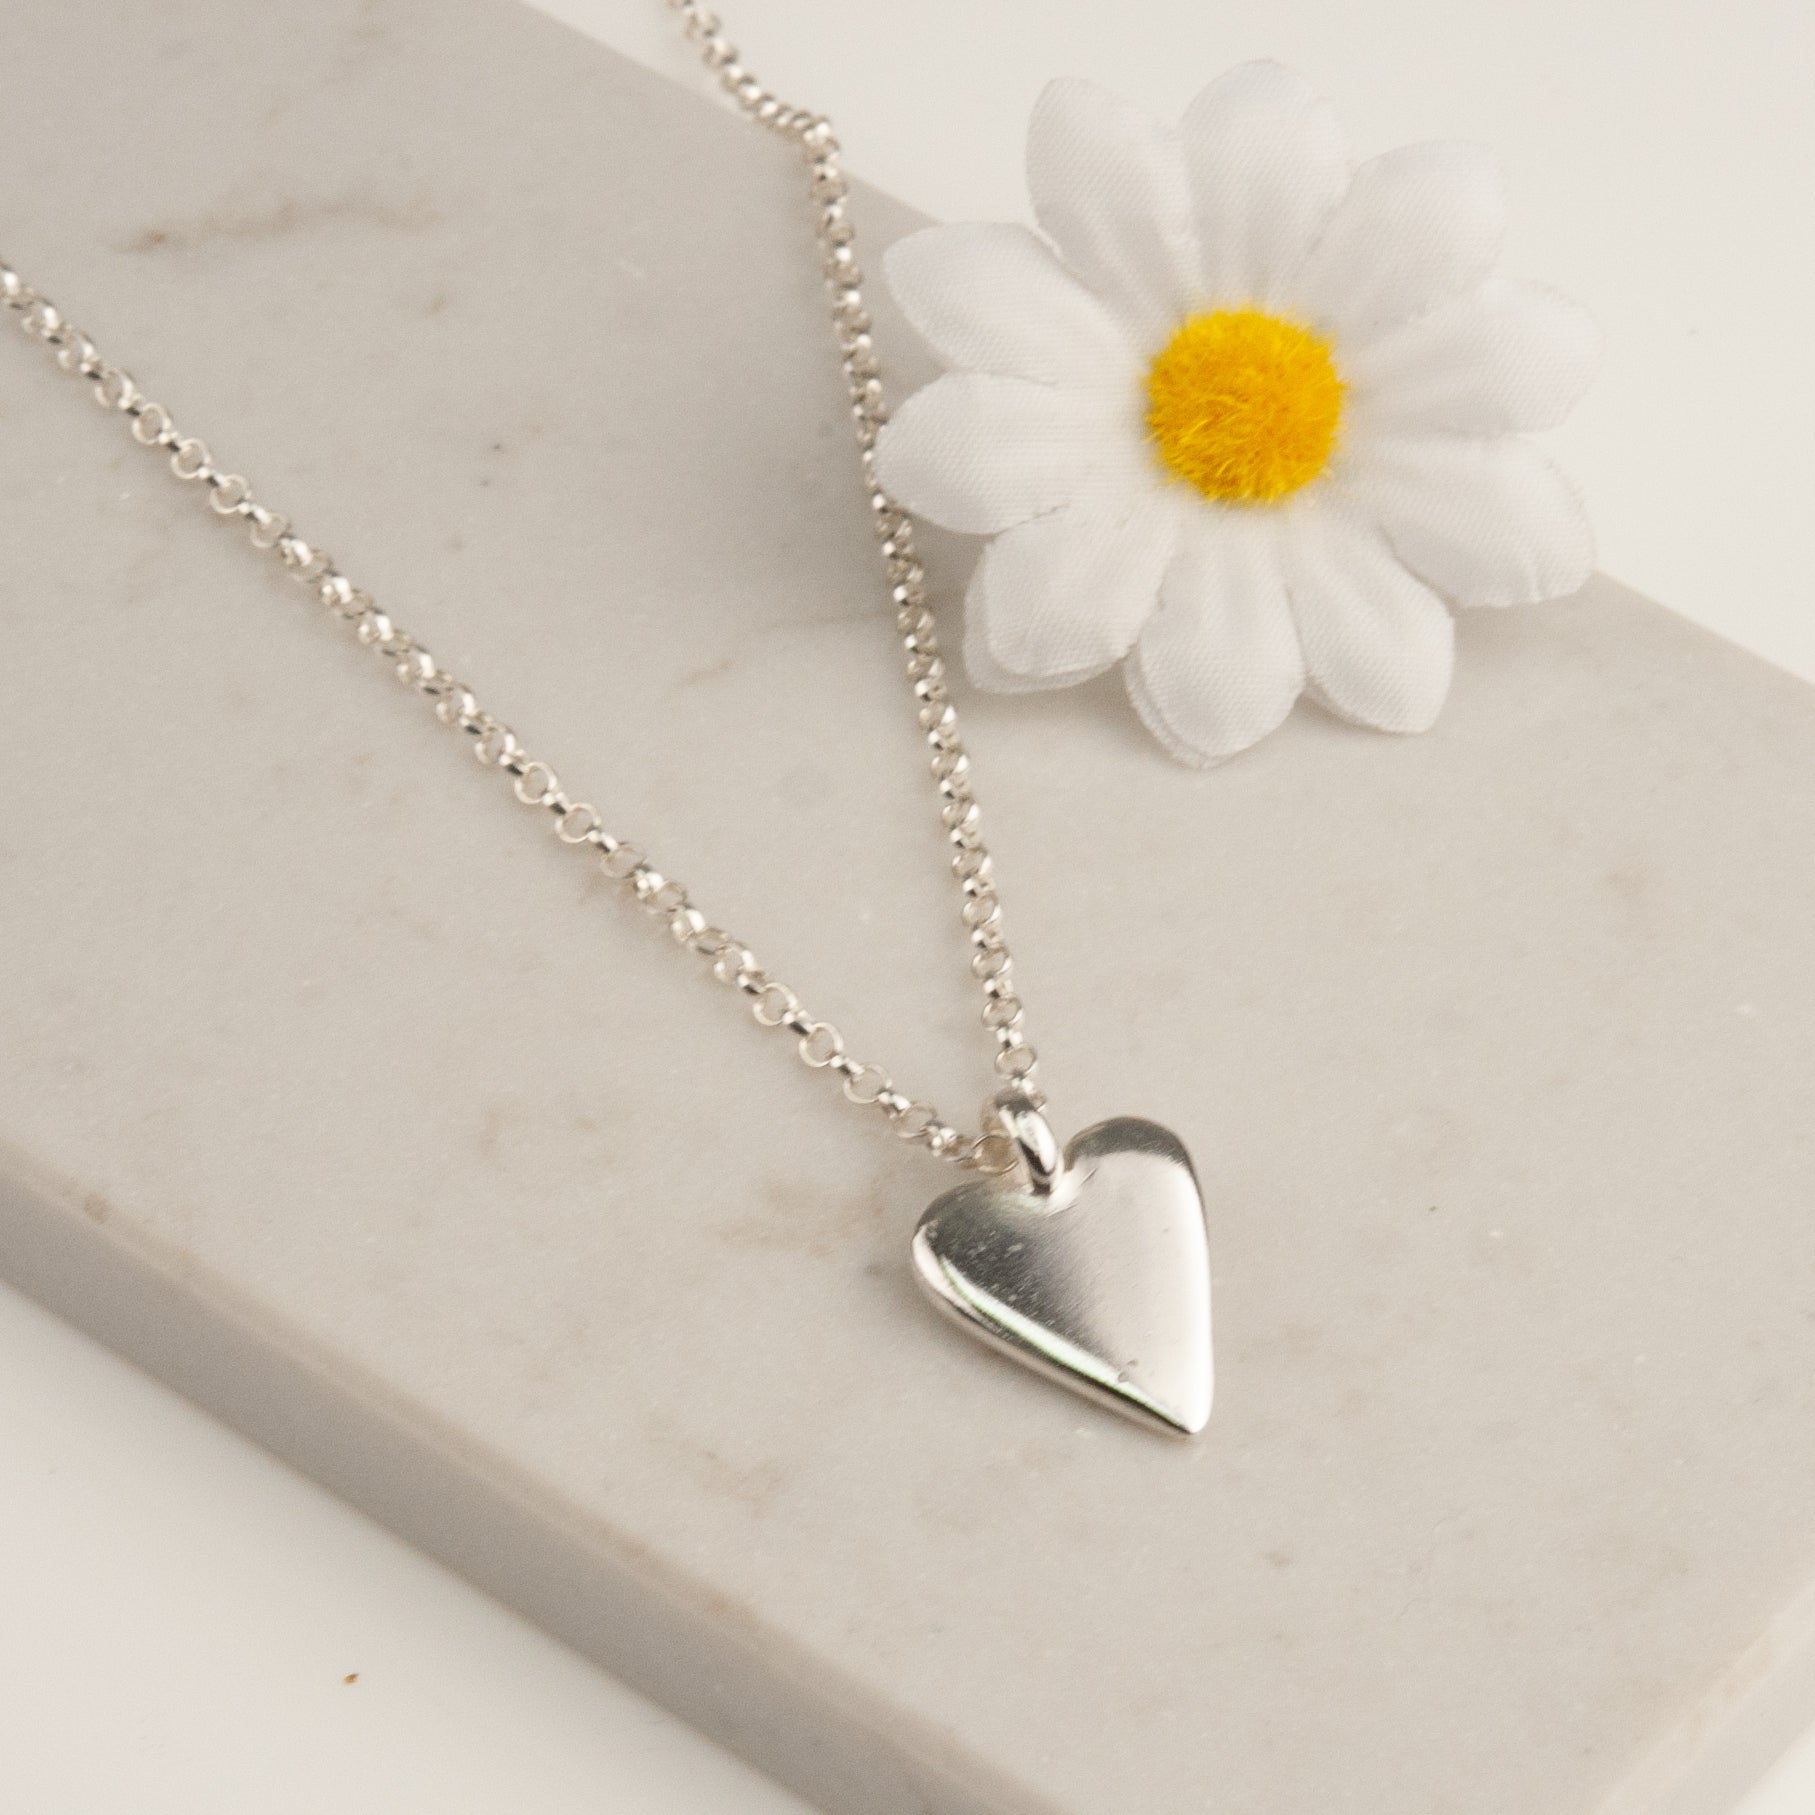 Belle & Bee Belcher necklace with Midi heart charm